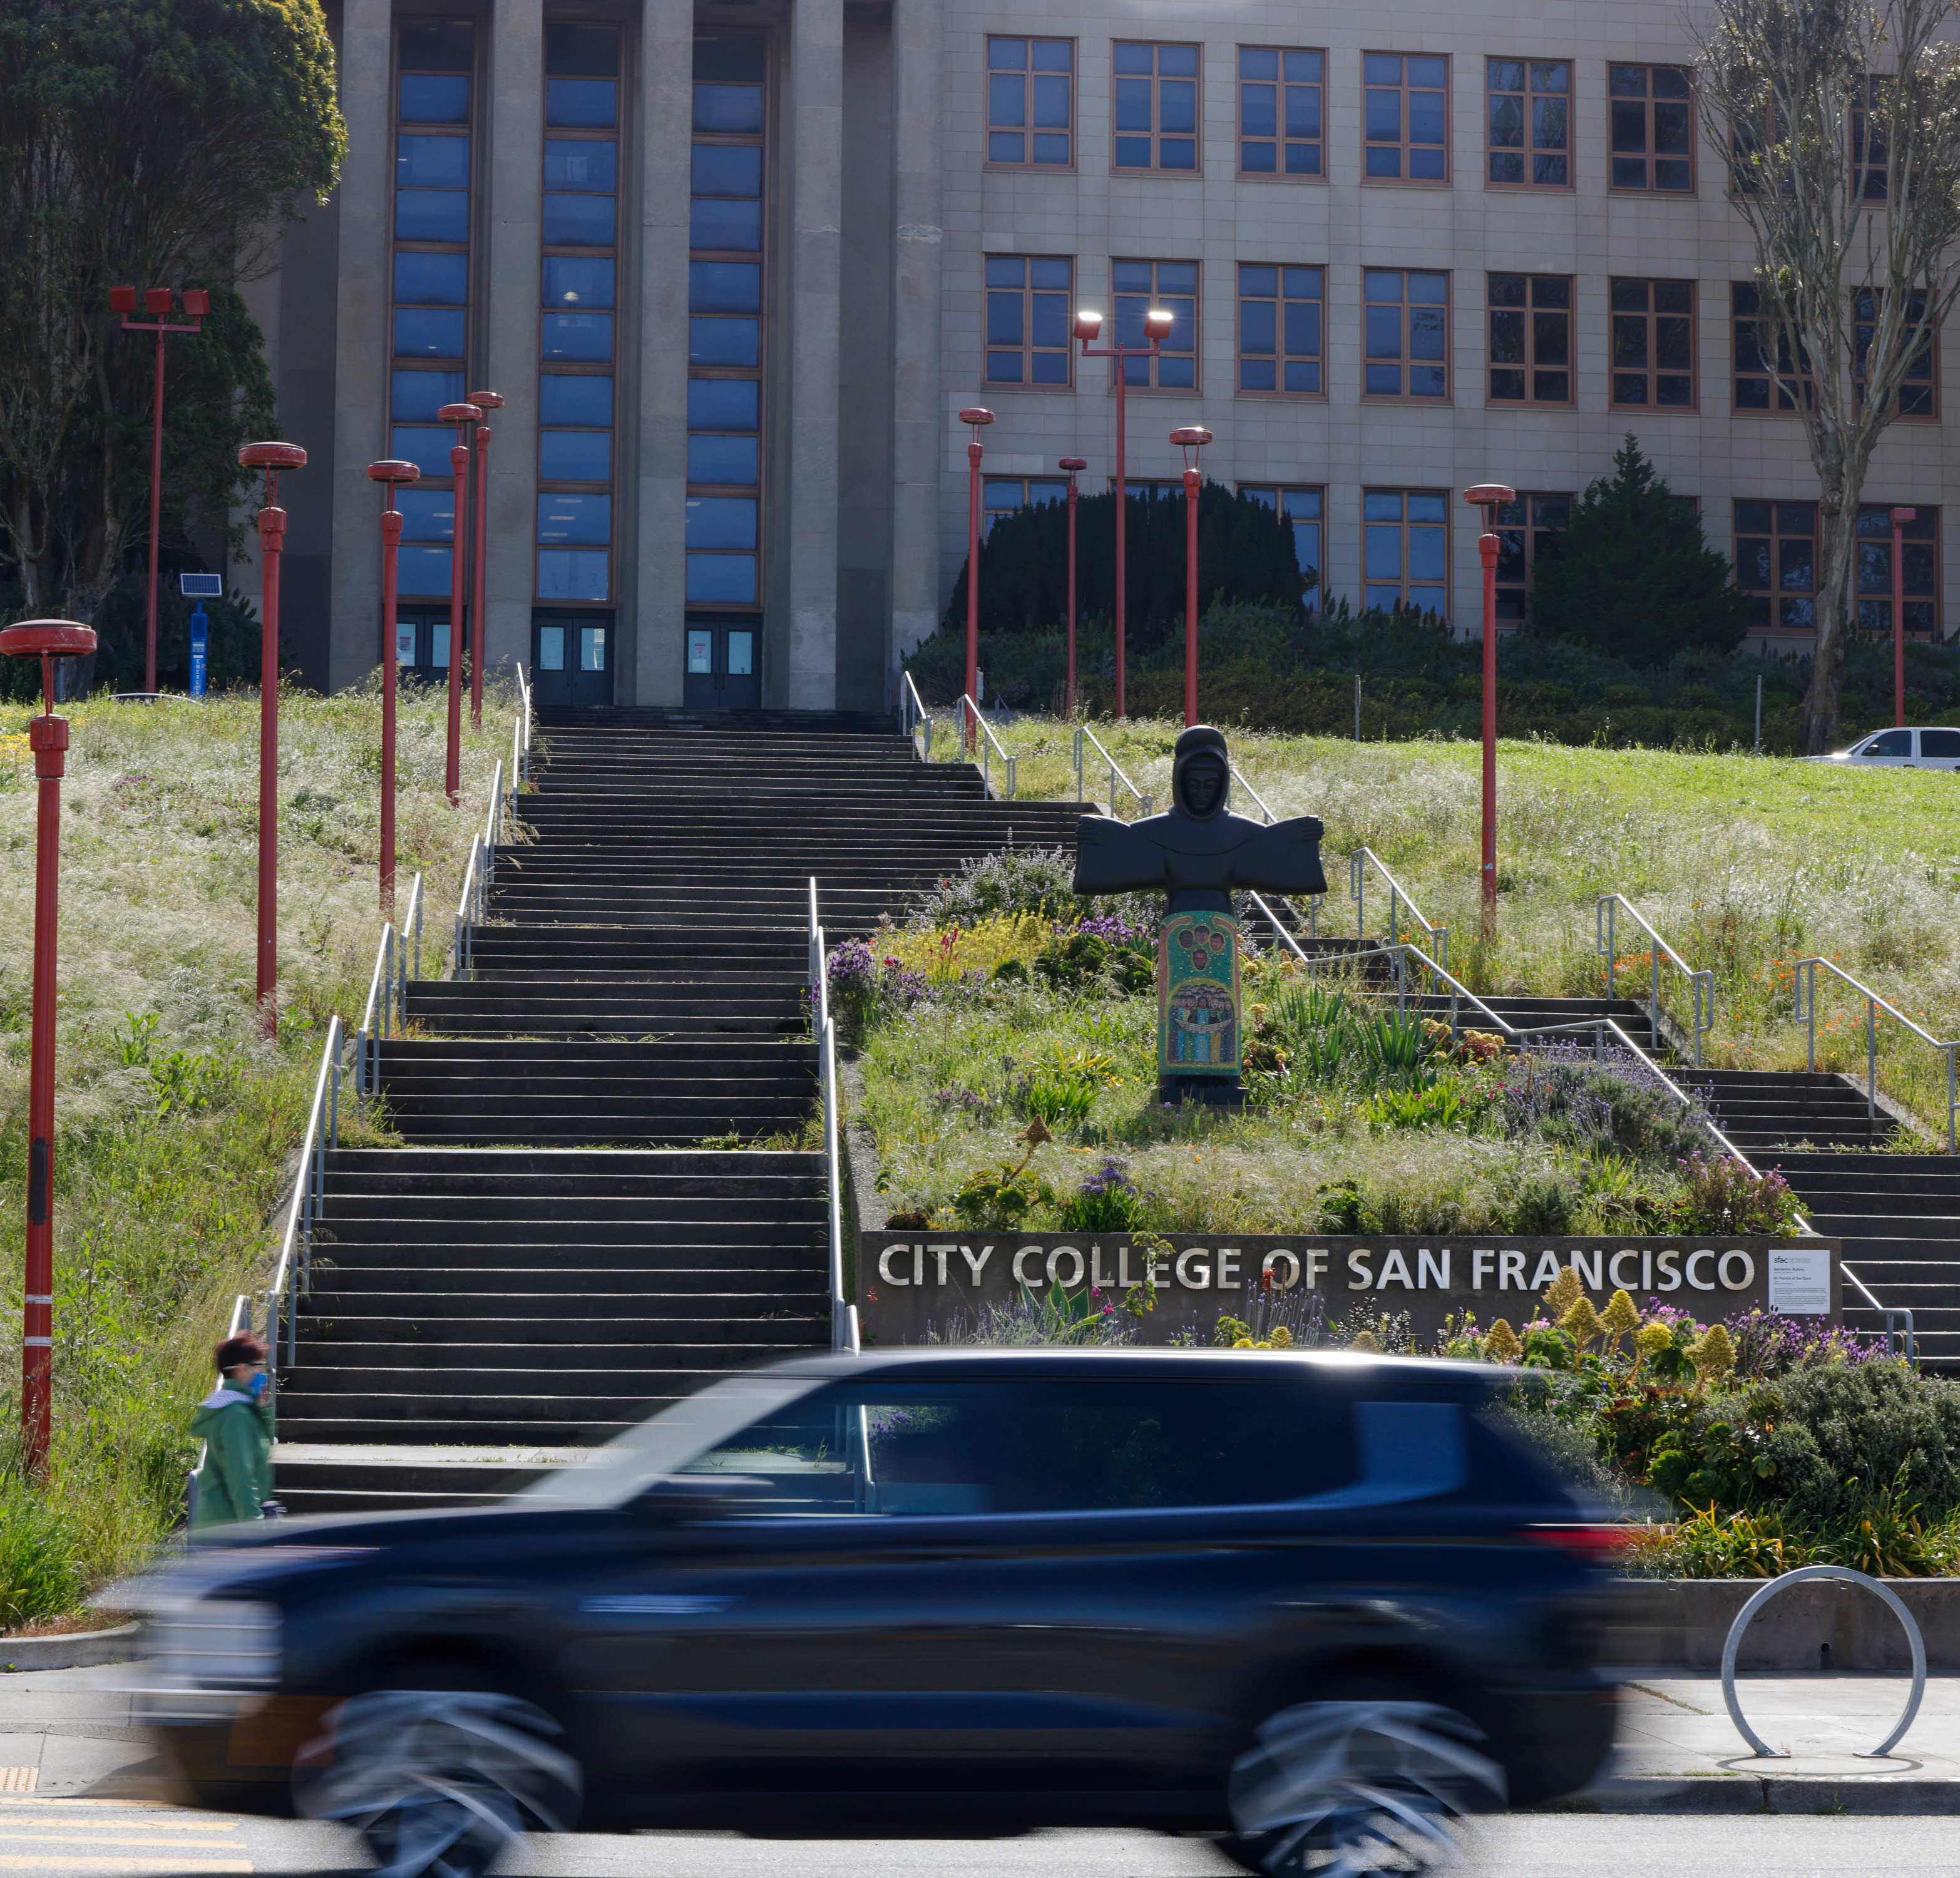 A car speeds past steps leading up to City College of San Francisco, flanked by red lamp posts and a colorful statue.